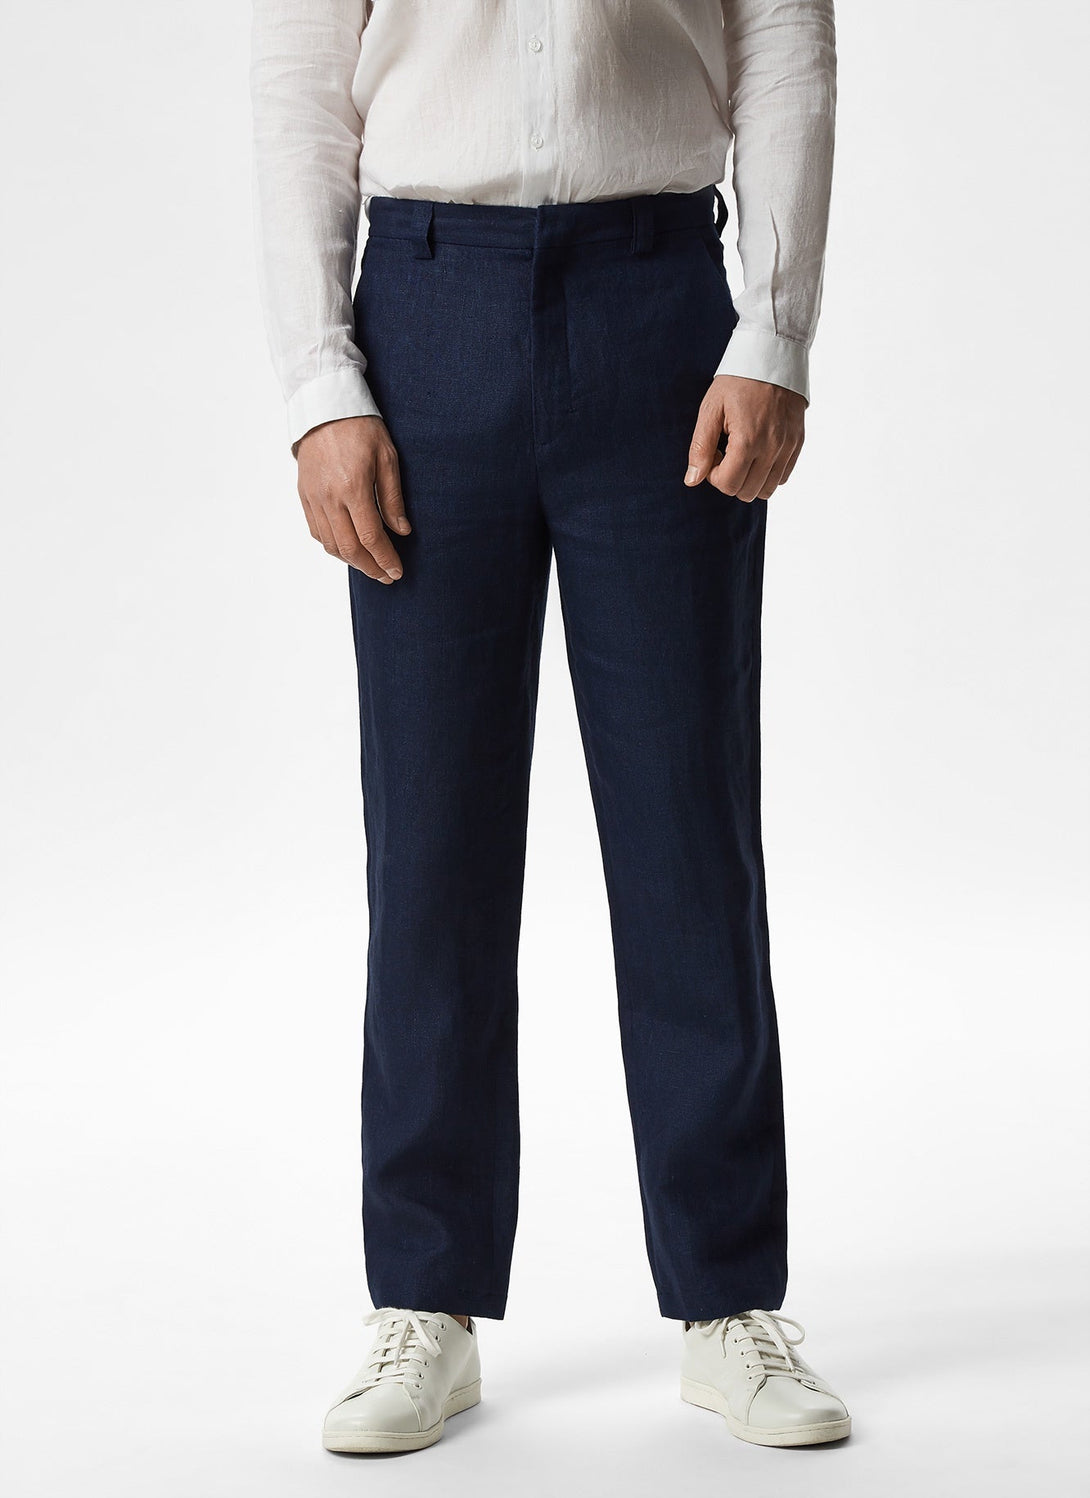 Men Trousers | Navy Blue Linen Trousers With Side Pockets by Spanish designer Adolfo Dominguez